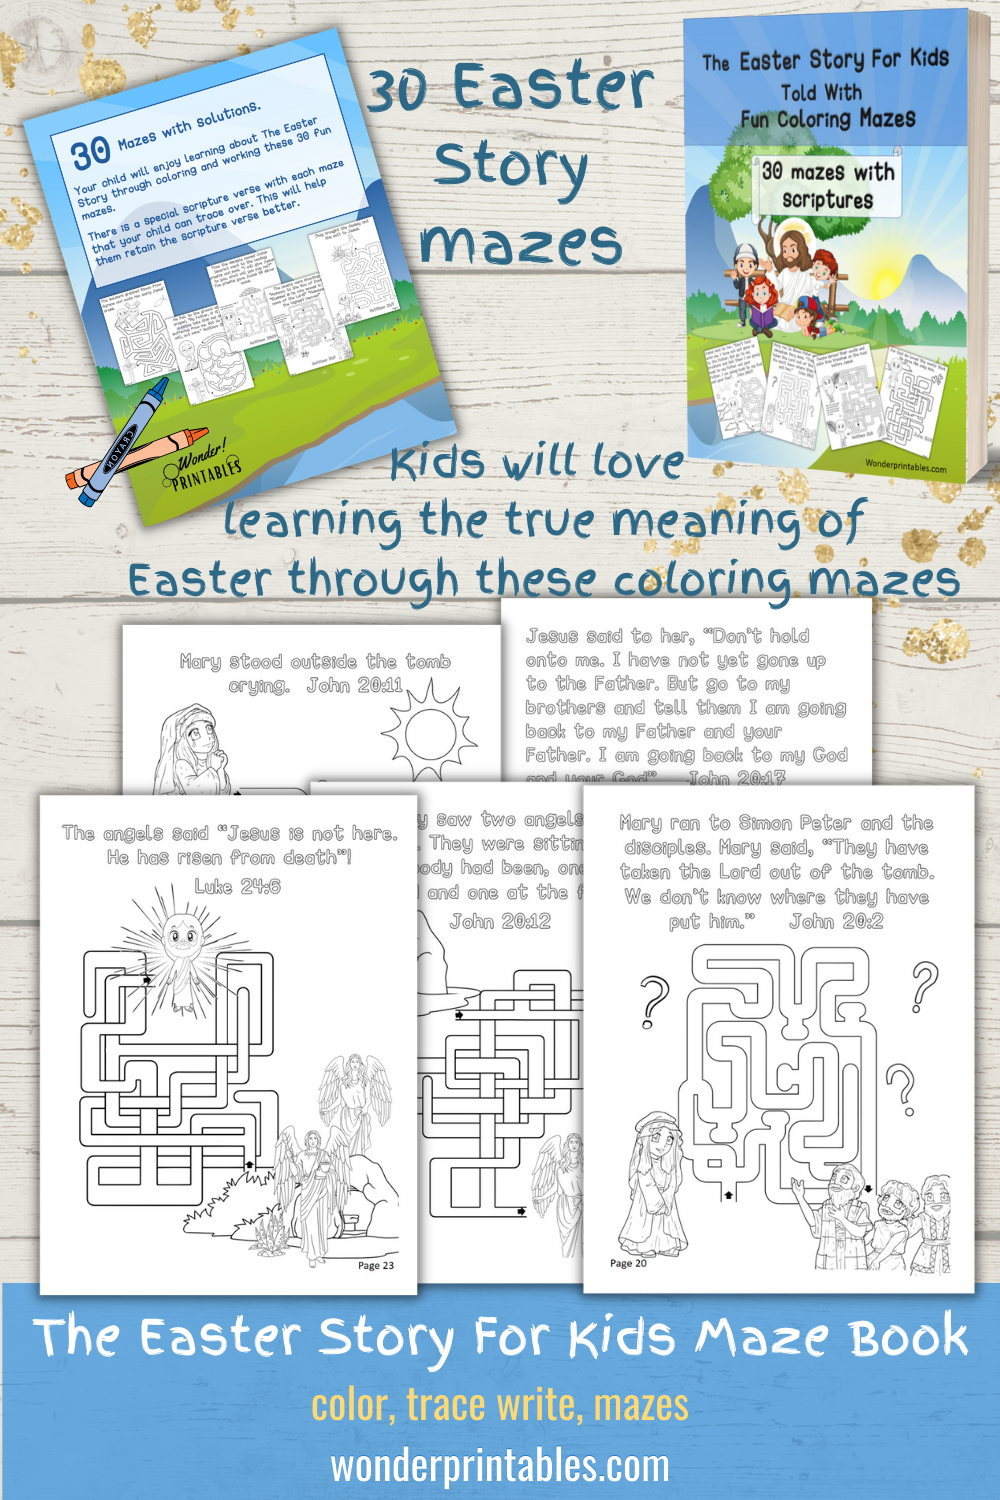 The Easter Story For Kids Maze Book - Printable